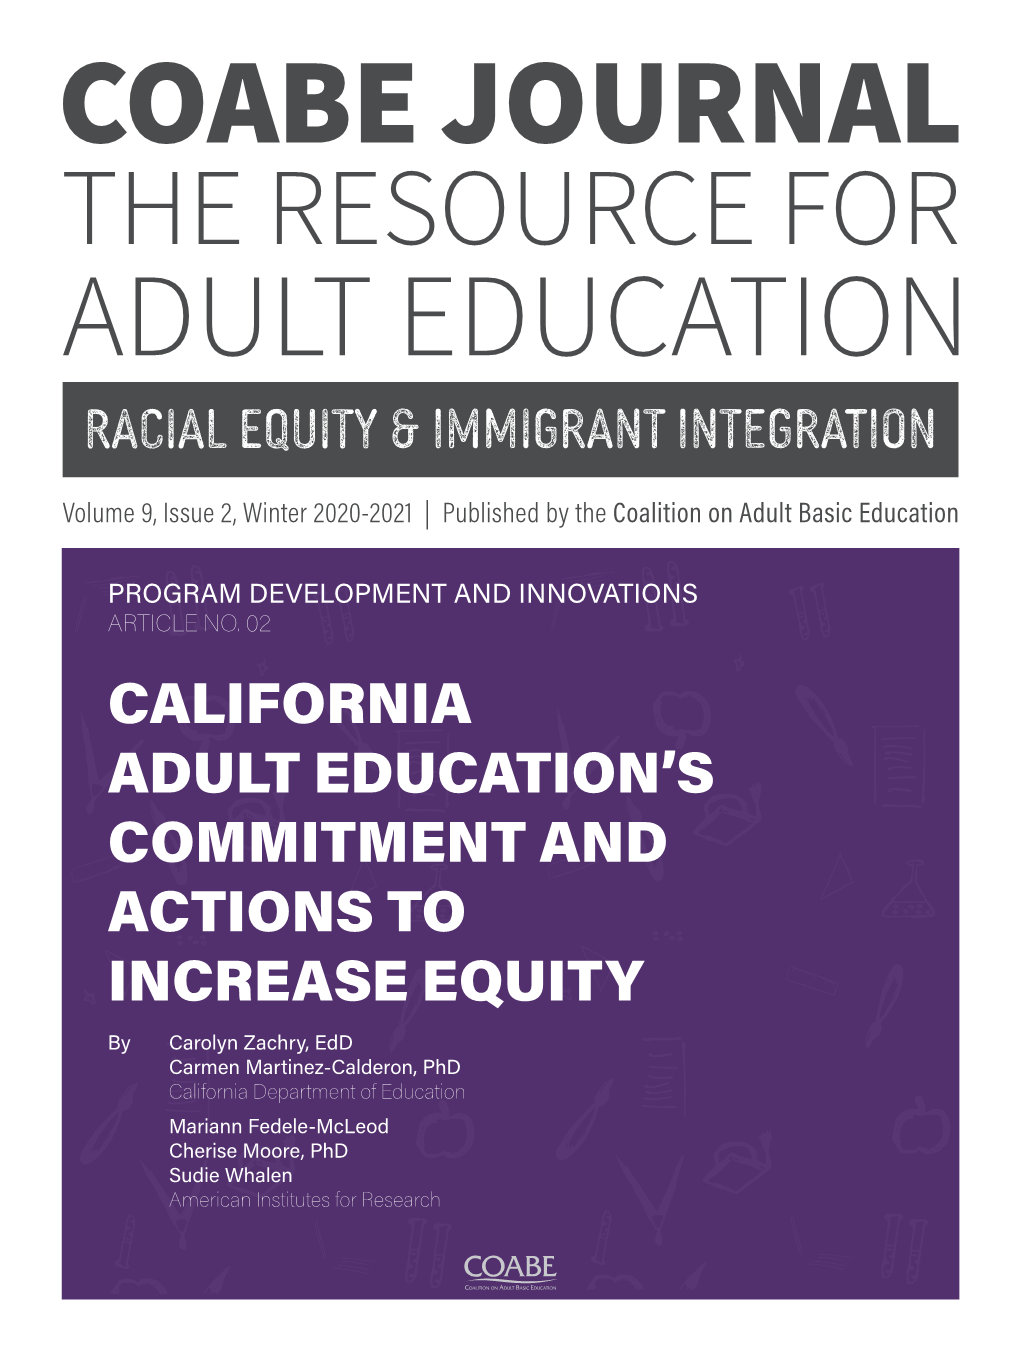 California Adult Education's Commitment And